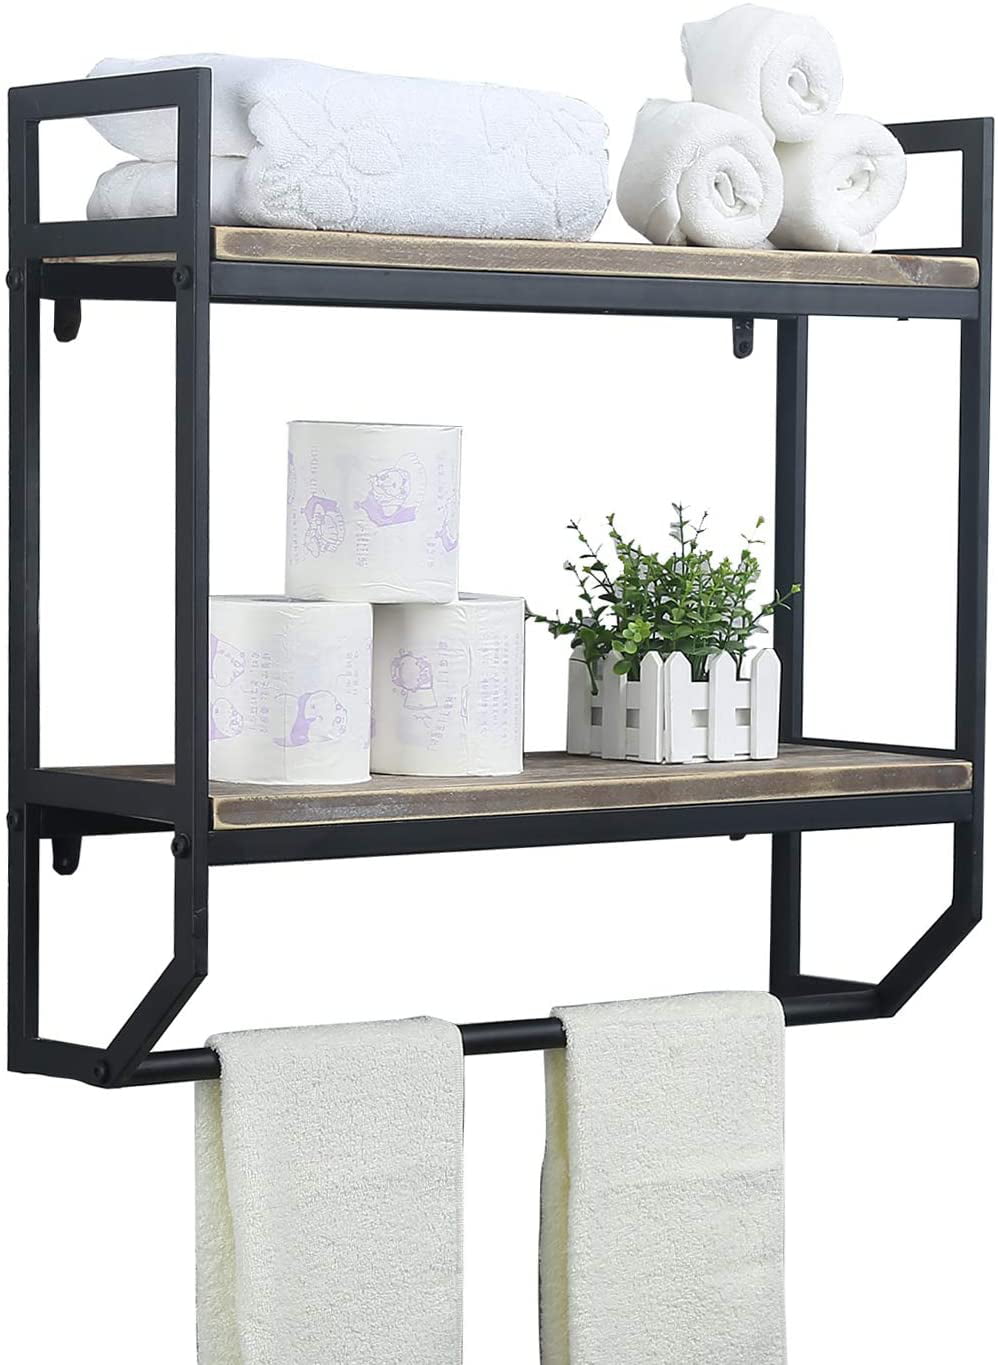 LOKO 2-Tier Bathroom Towel Rack with Shelf, Industrial Over The Toilet Shelf  with Towel Bar, Wall Mounted Hanging Shelf with Towel Holder, Rustic  Storage Organizer Shelves for Living Room, Kitchen - Yahoo